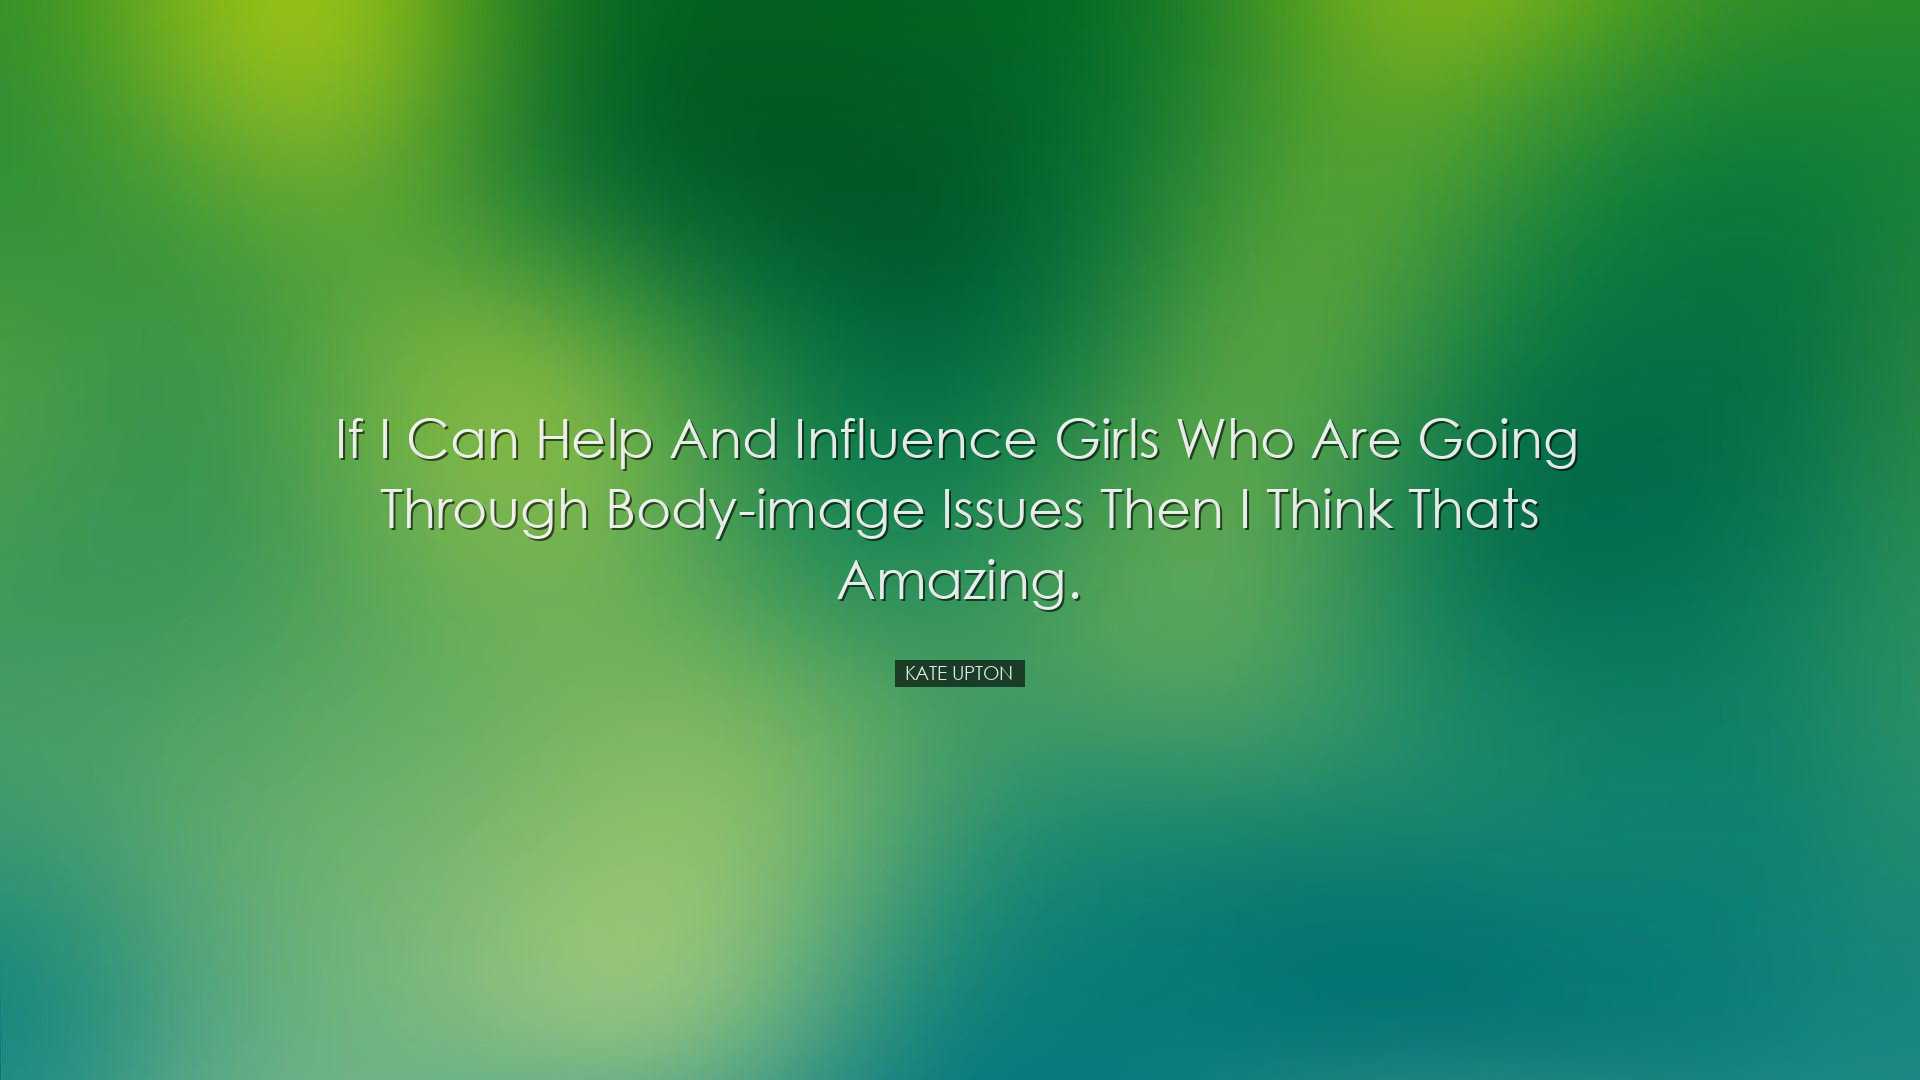 If I can help and influence girls who are going through body-image